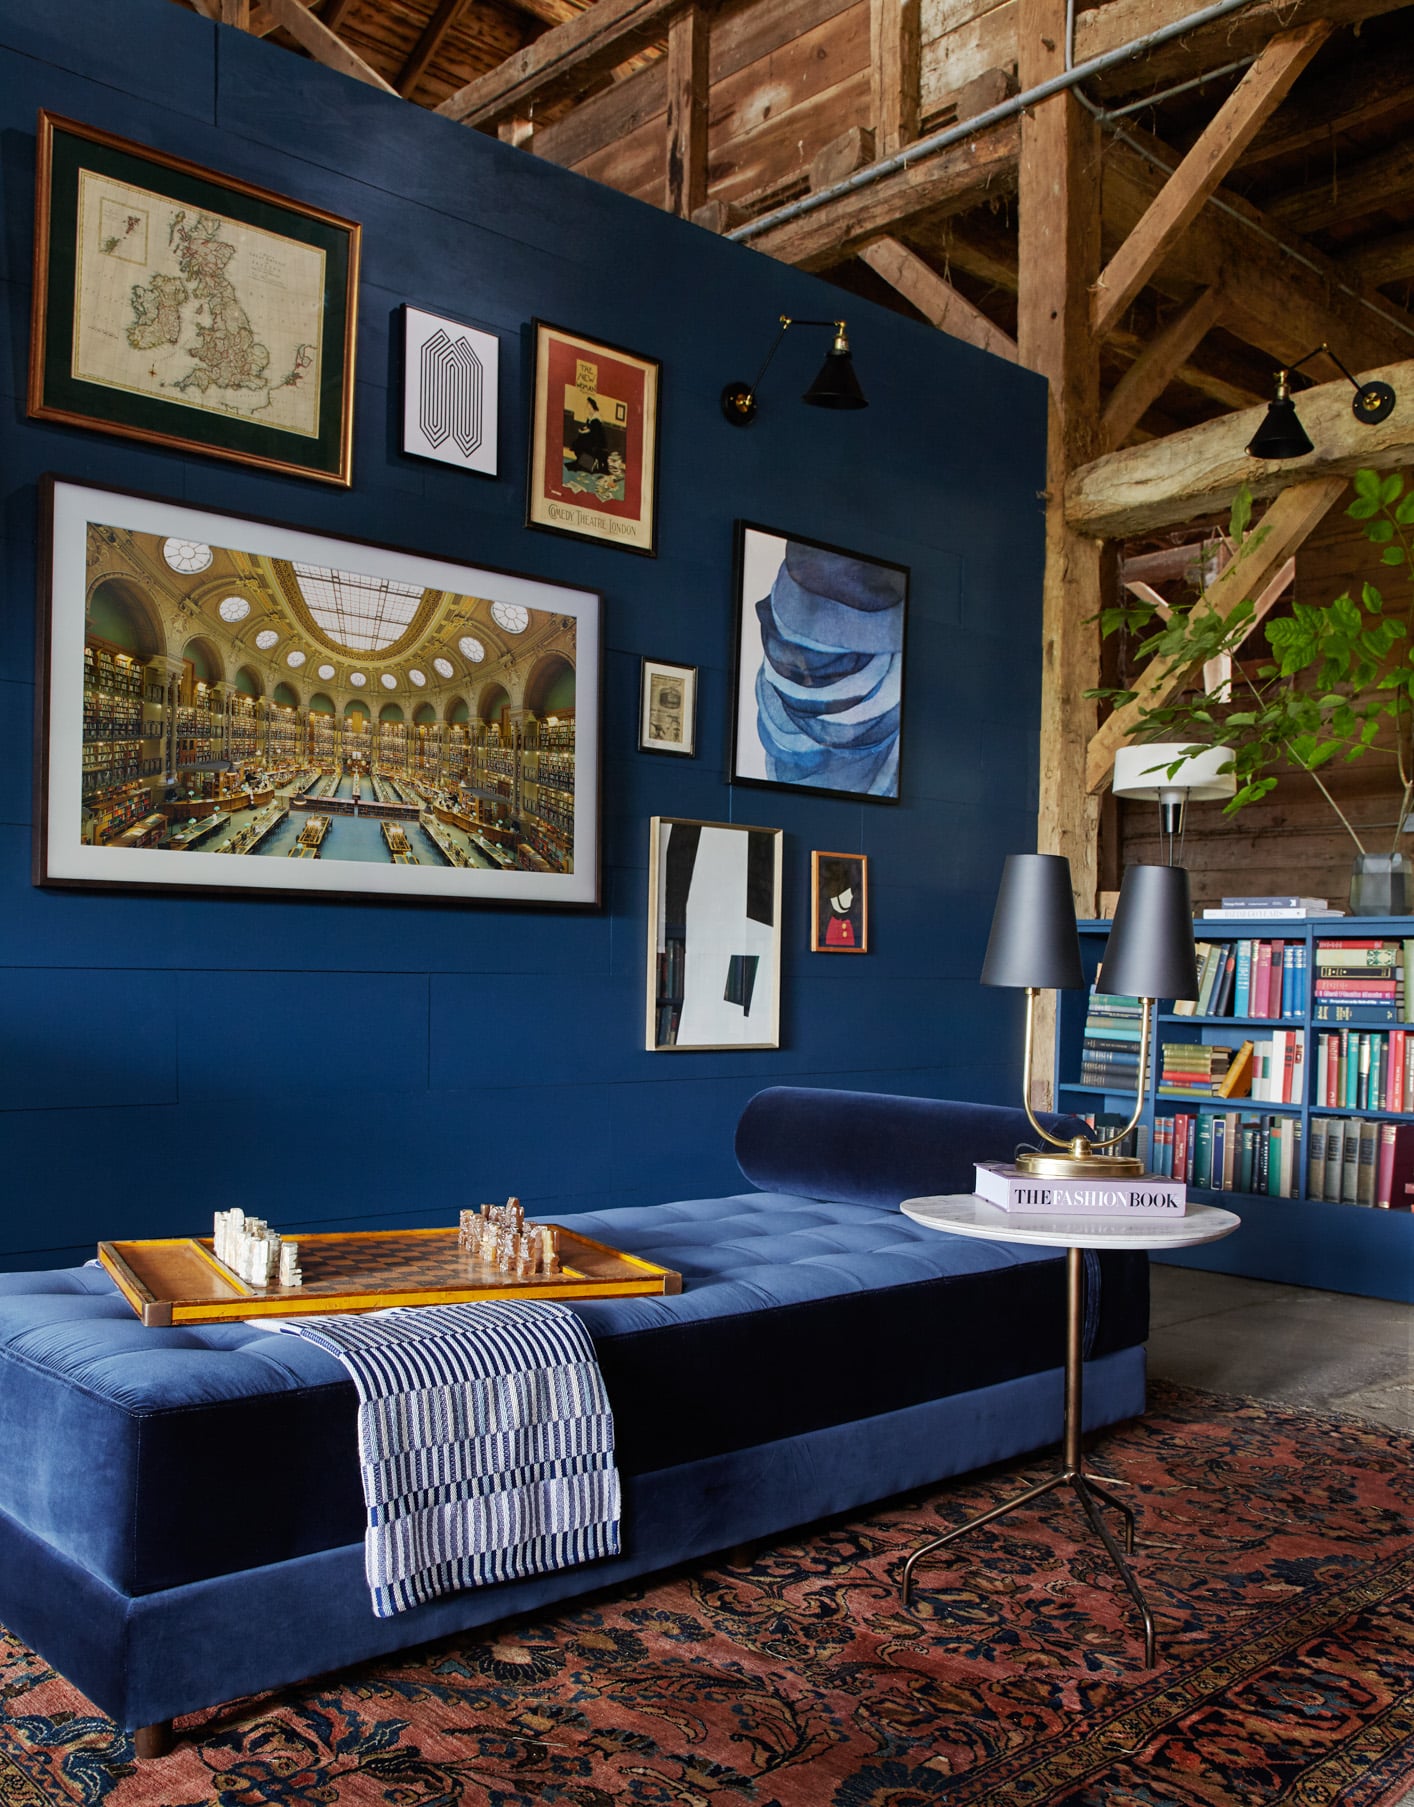 Blue velvet chaise lounge in front of blue wall with various framed maps, paintings and and photos hanging